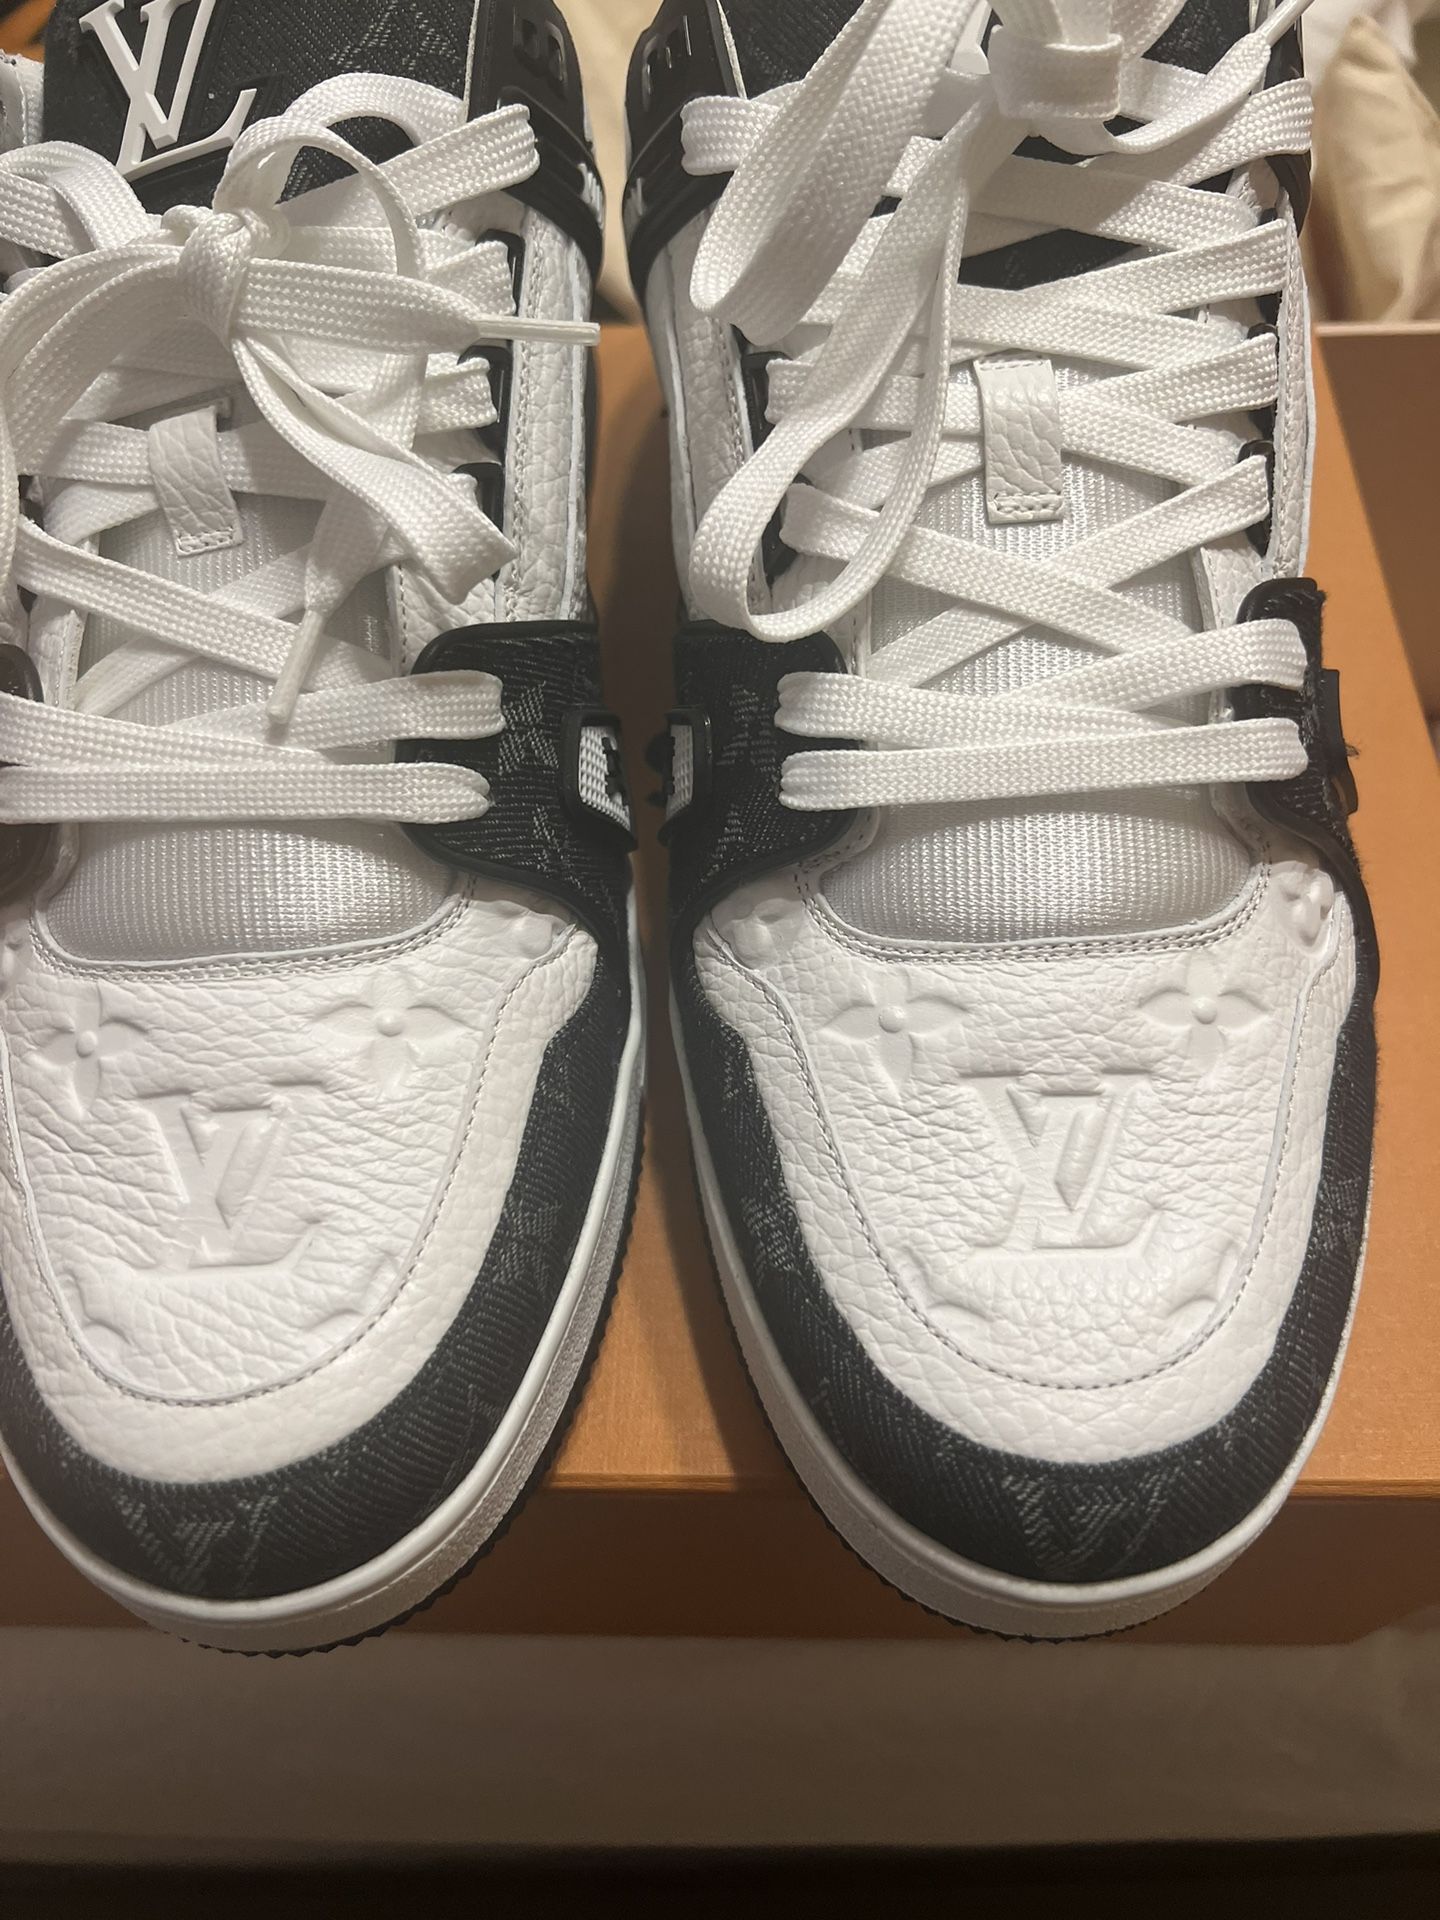 Louis Vuitton Pink Rose Trainers for Sale in Phoenix, AZ - OfferUp